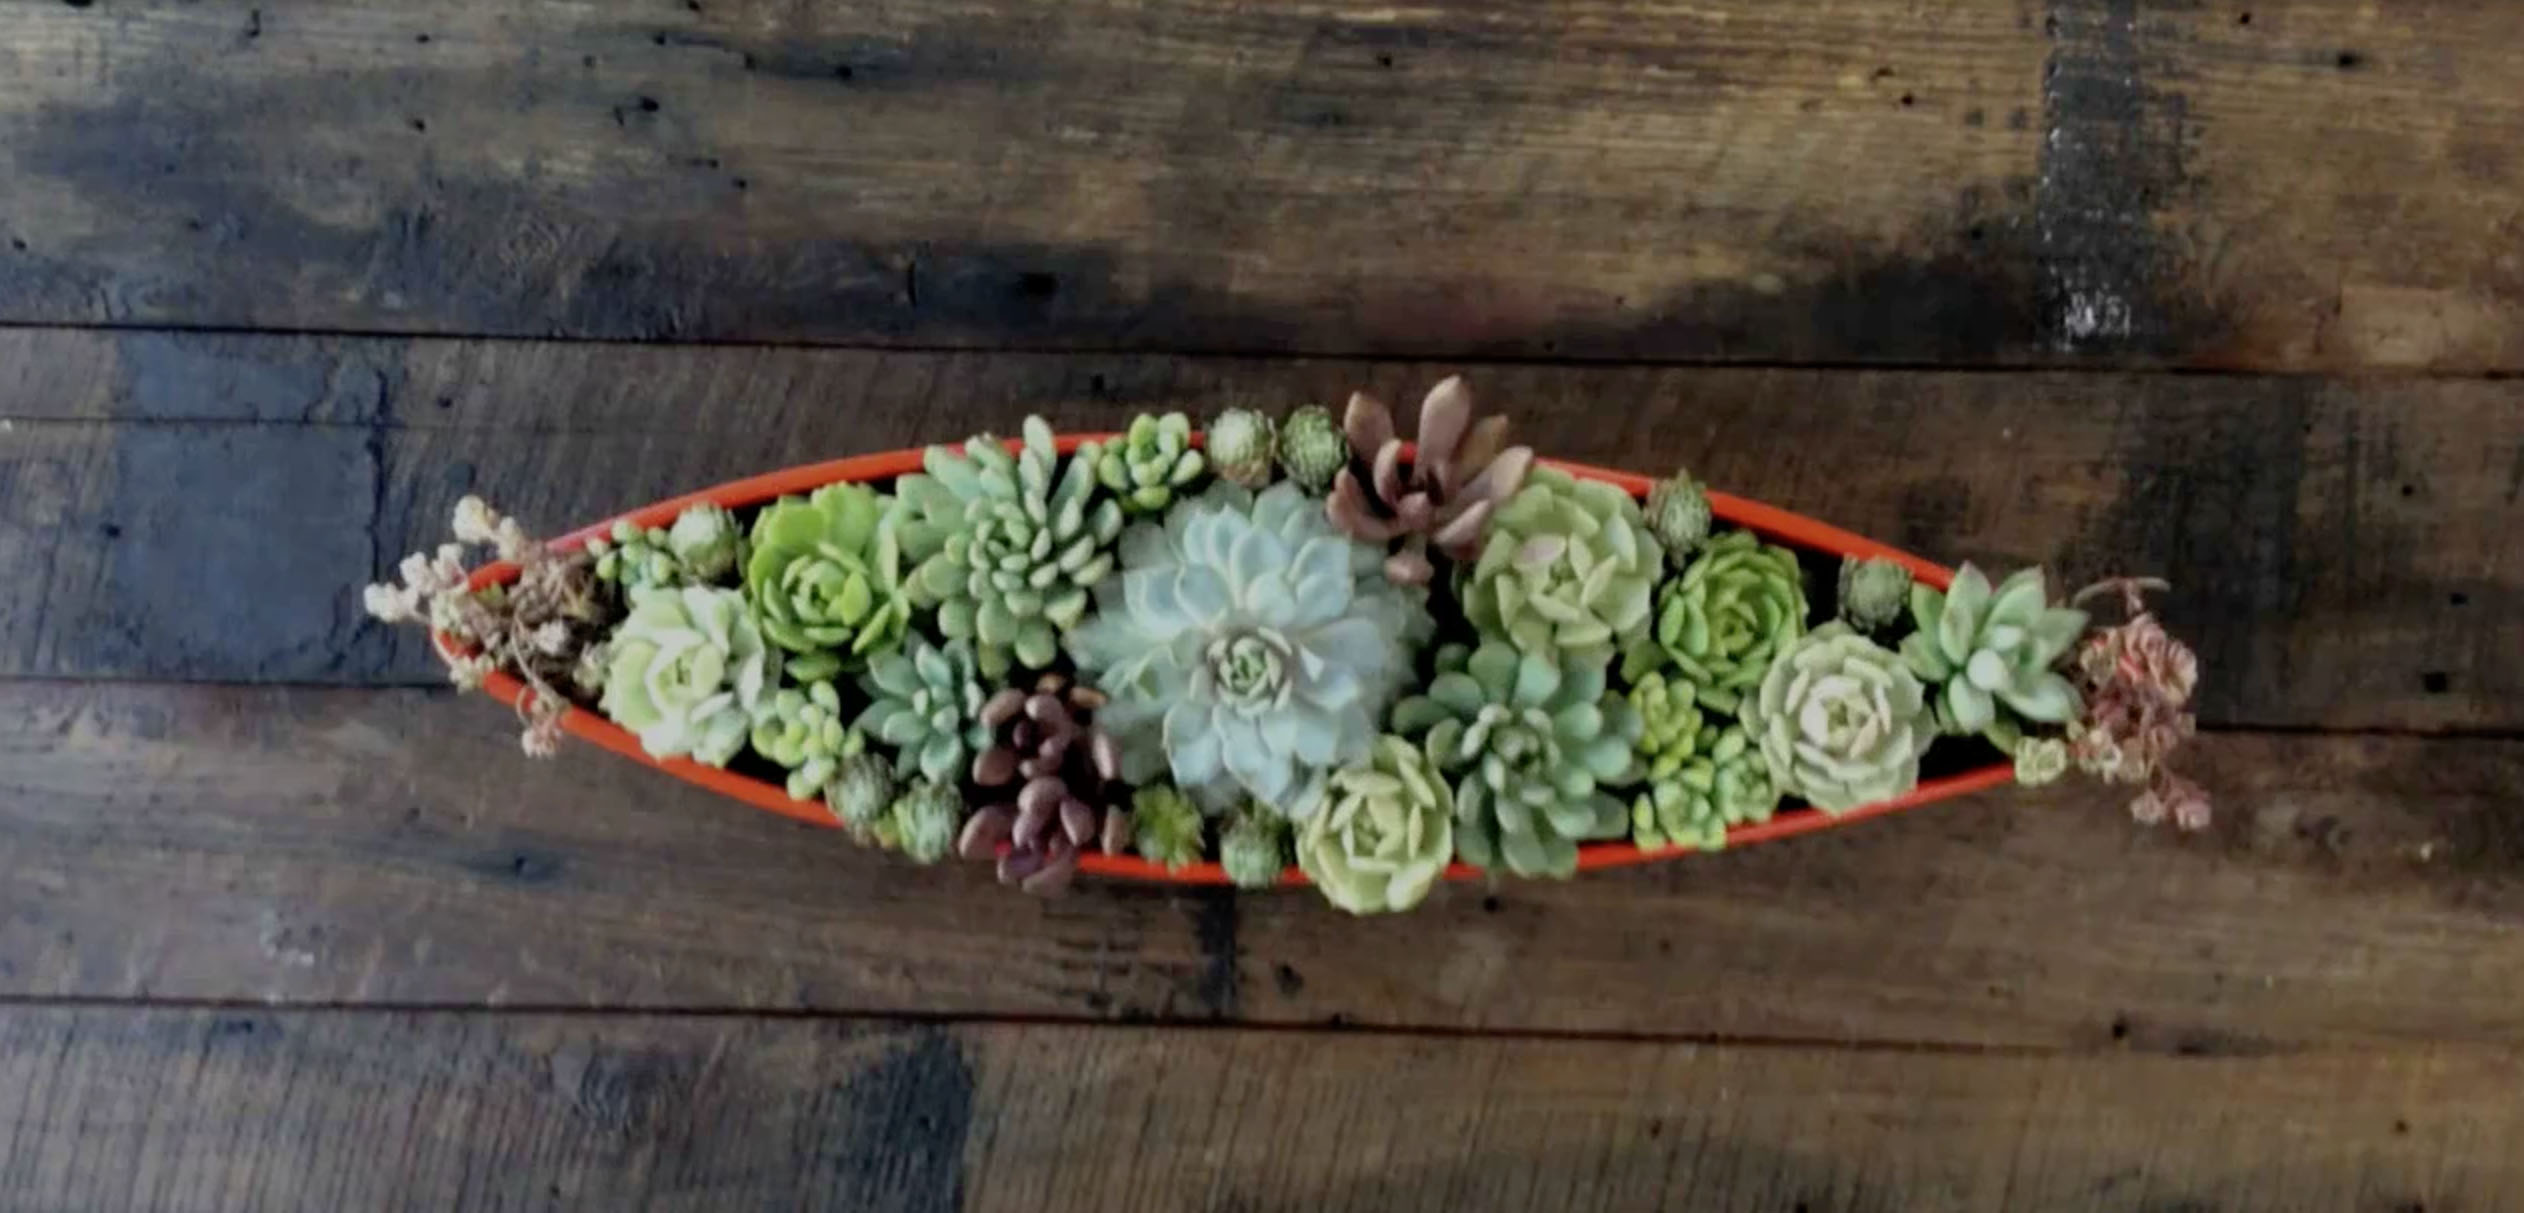 How to Make a Succulent Centerpiece